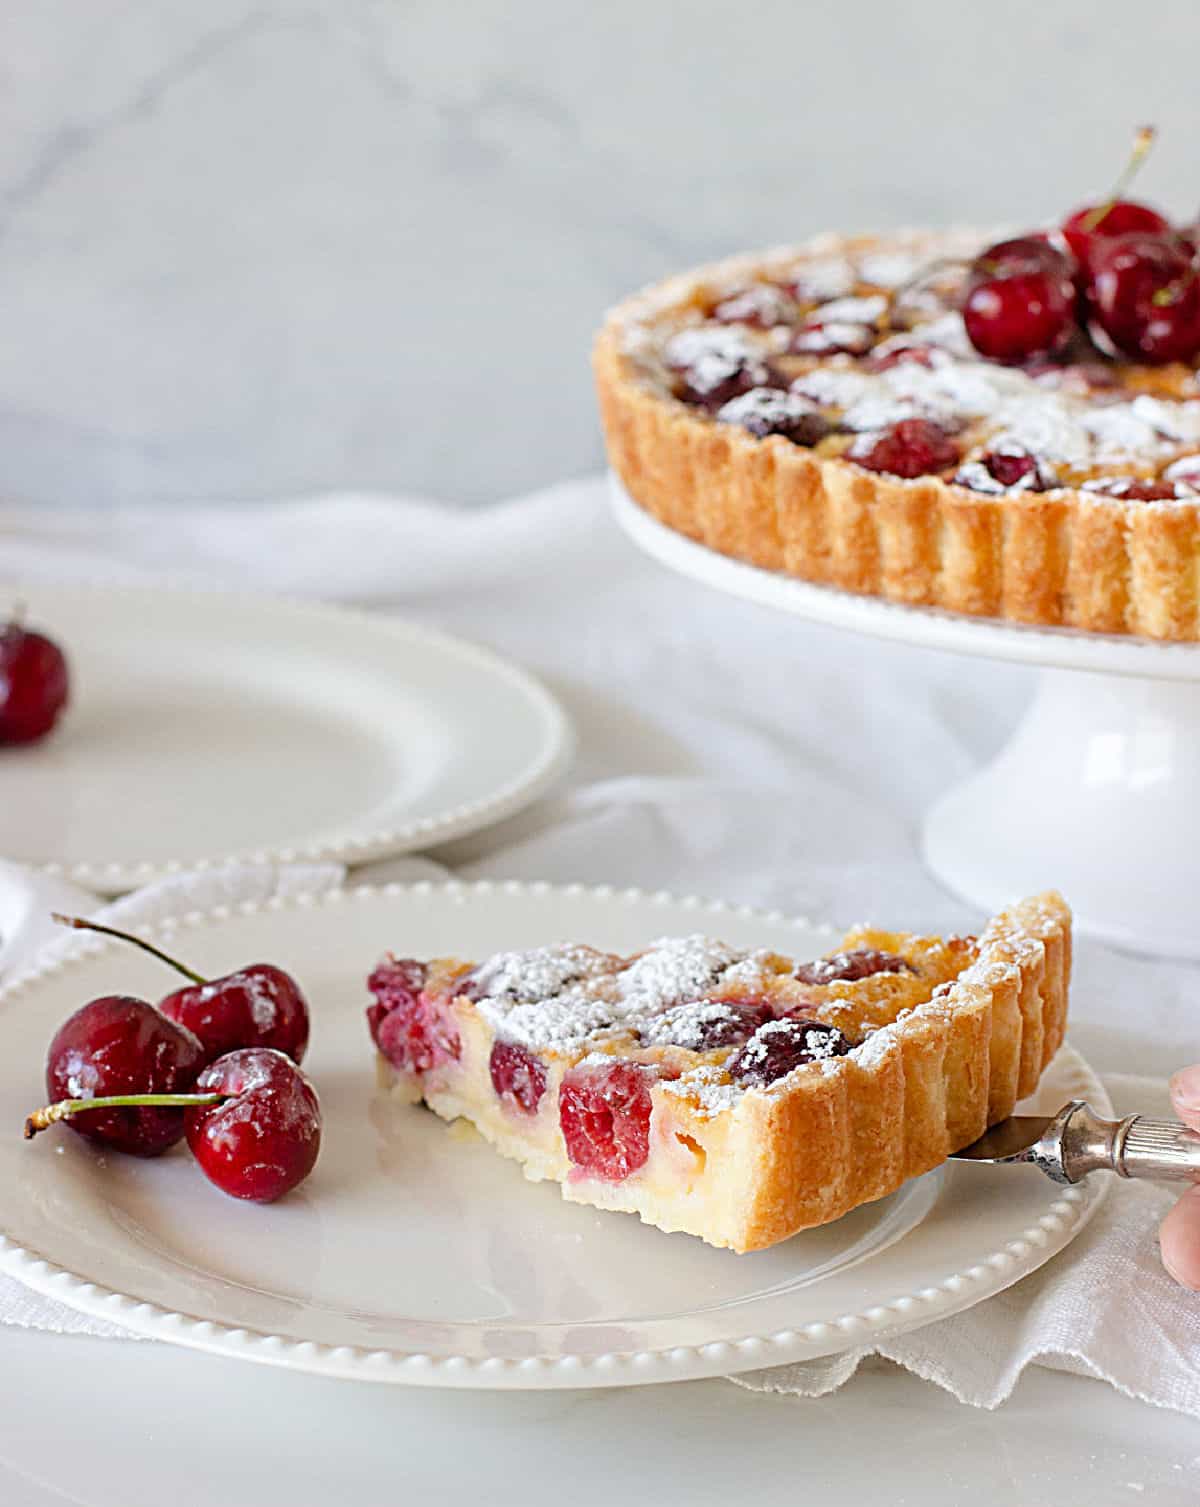 Placing a slice of cherry pie on white plate, tart on cake stand, white background.